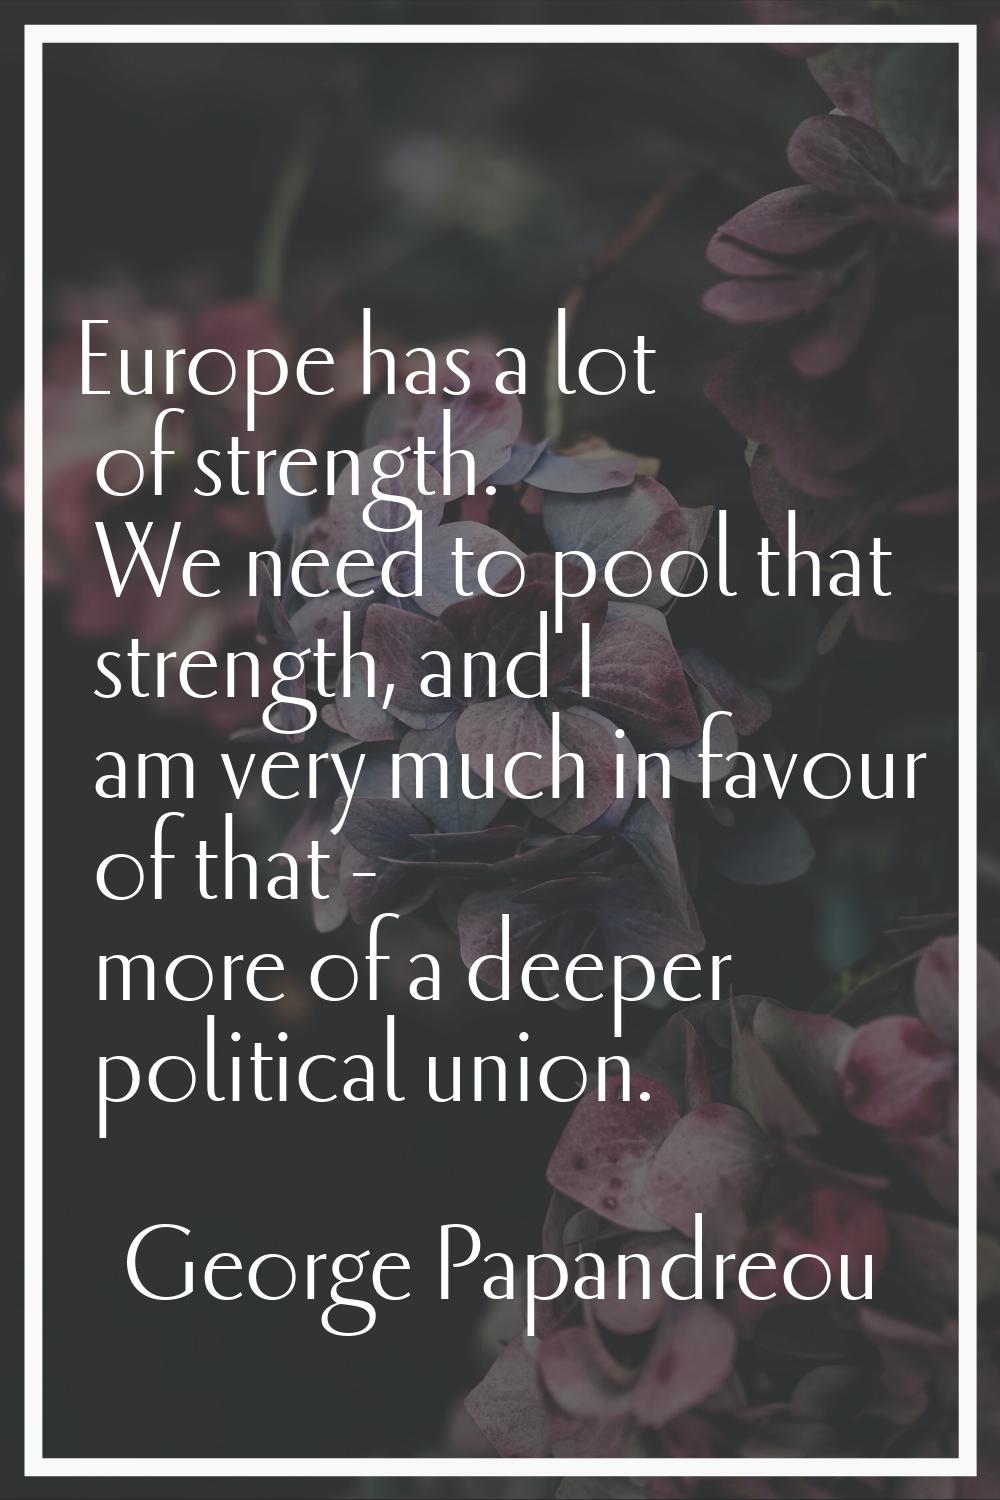 Europe has a lot of strength. We need to pool that strength, and I am very much in favour of that -